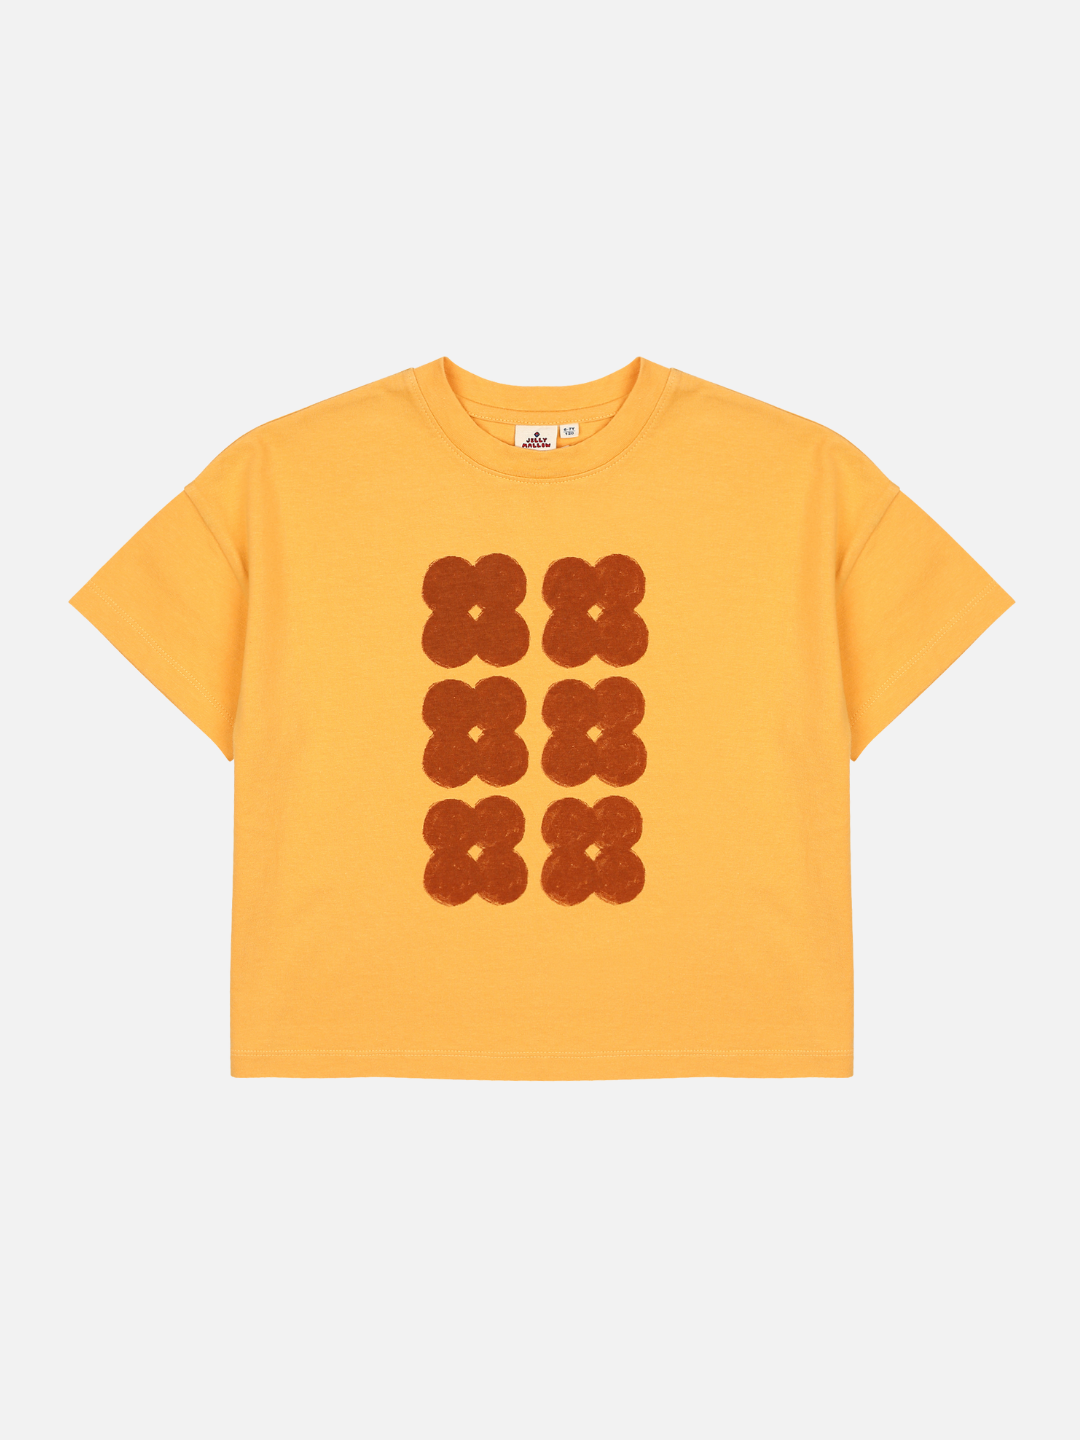 Front of T-shirt with six dark orange clover shapes in two vertical rows on a yellow background.